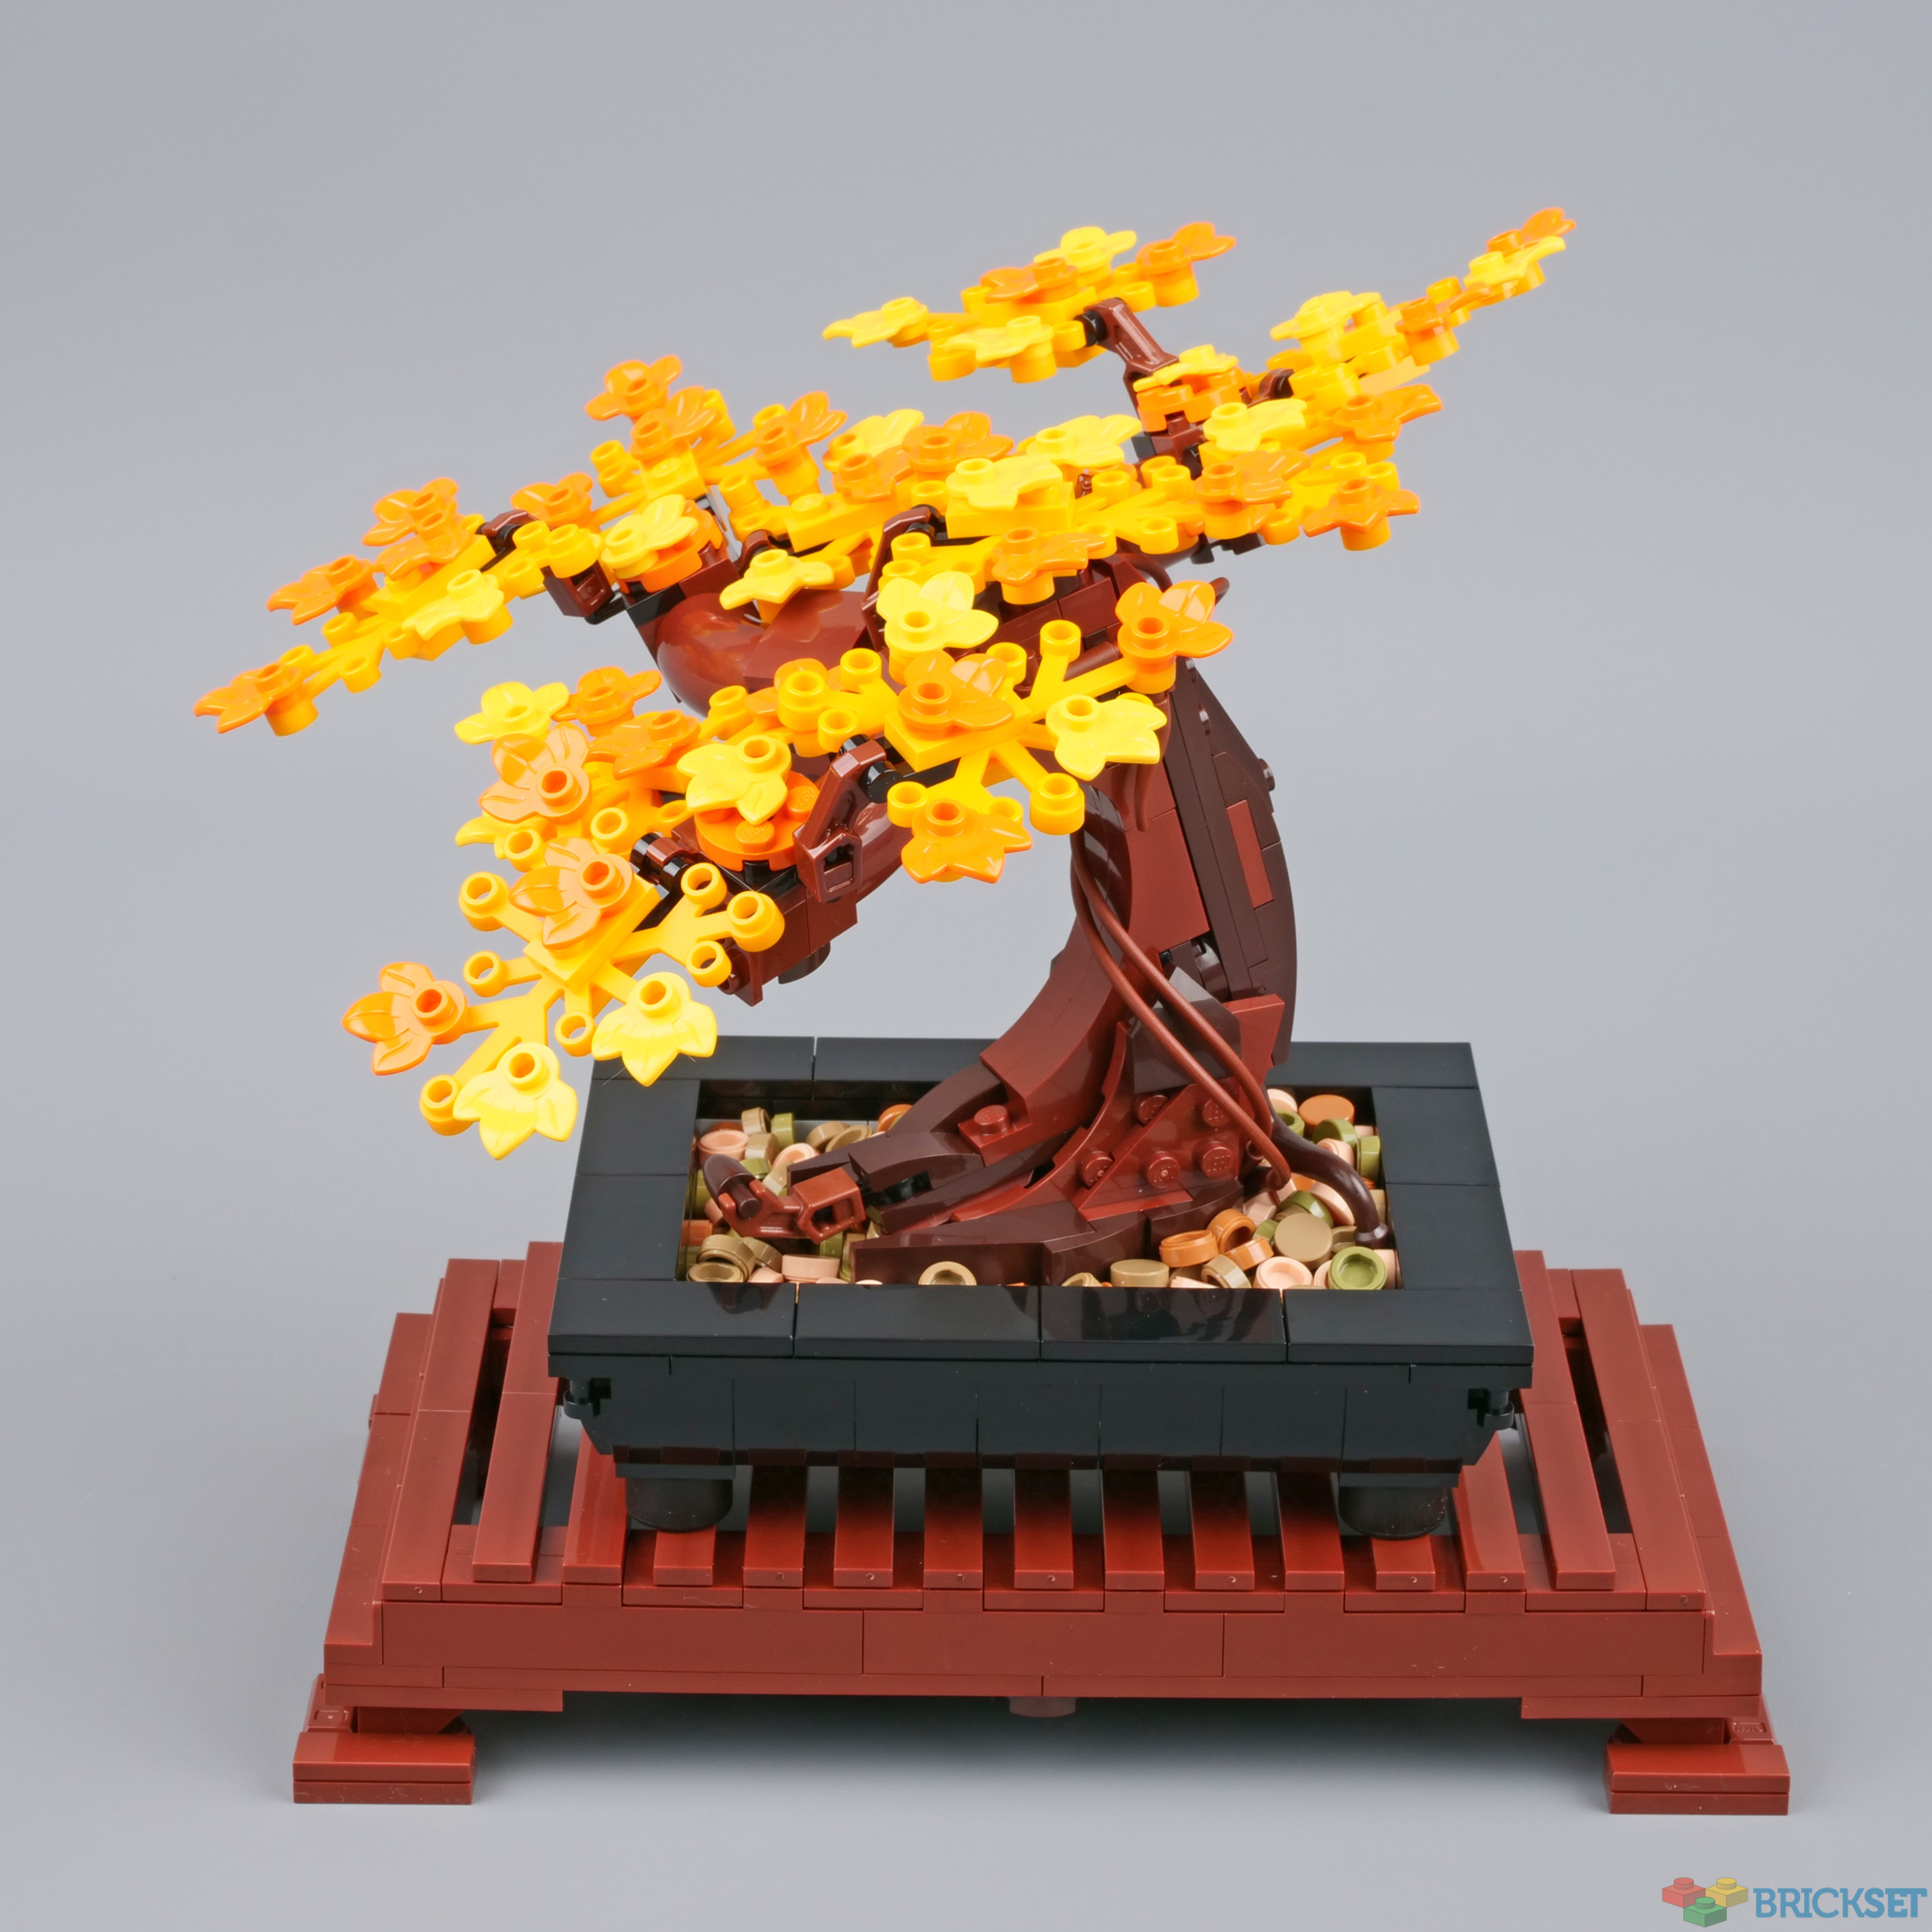 Lego Bonsai Tree And Flower Bouquet Sets Are Available On Amazon ...